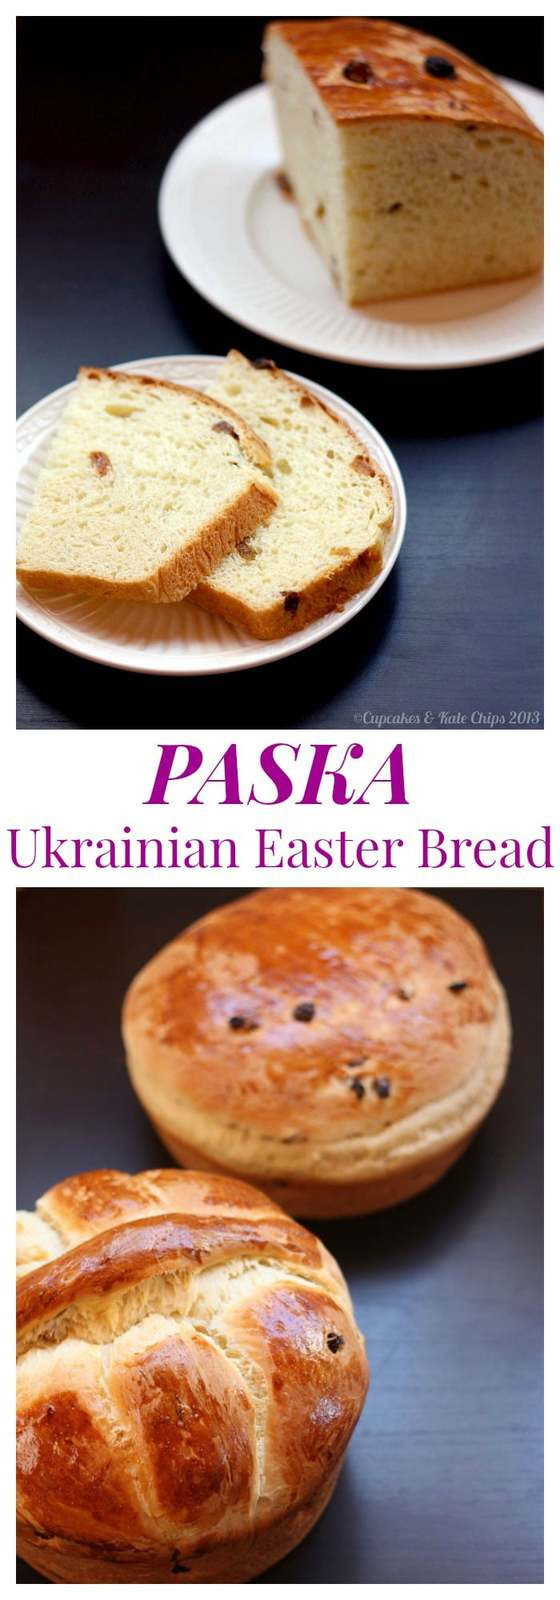 The Best Ideas for Paska Bread Recipe - Home, Family, Style and Art Ideas